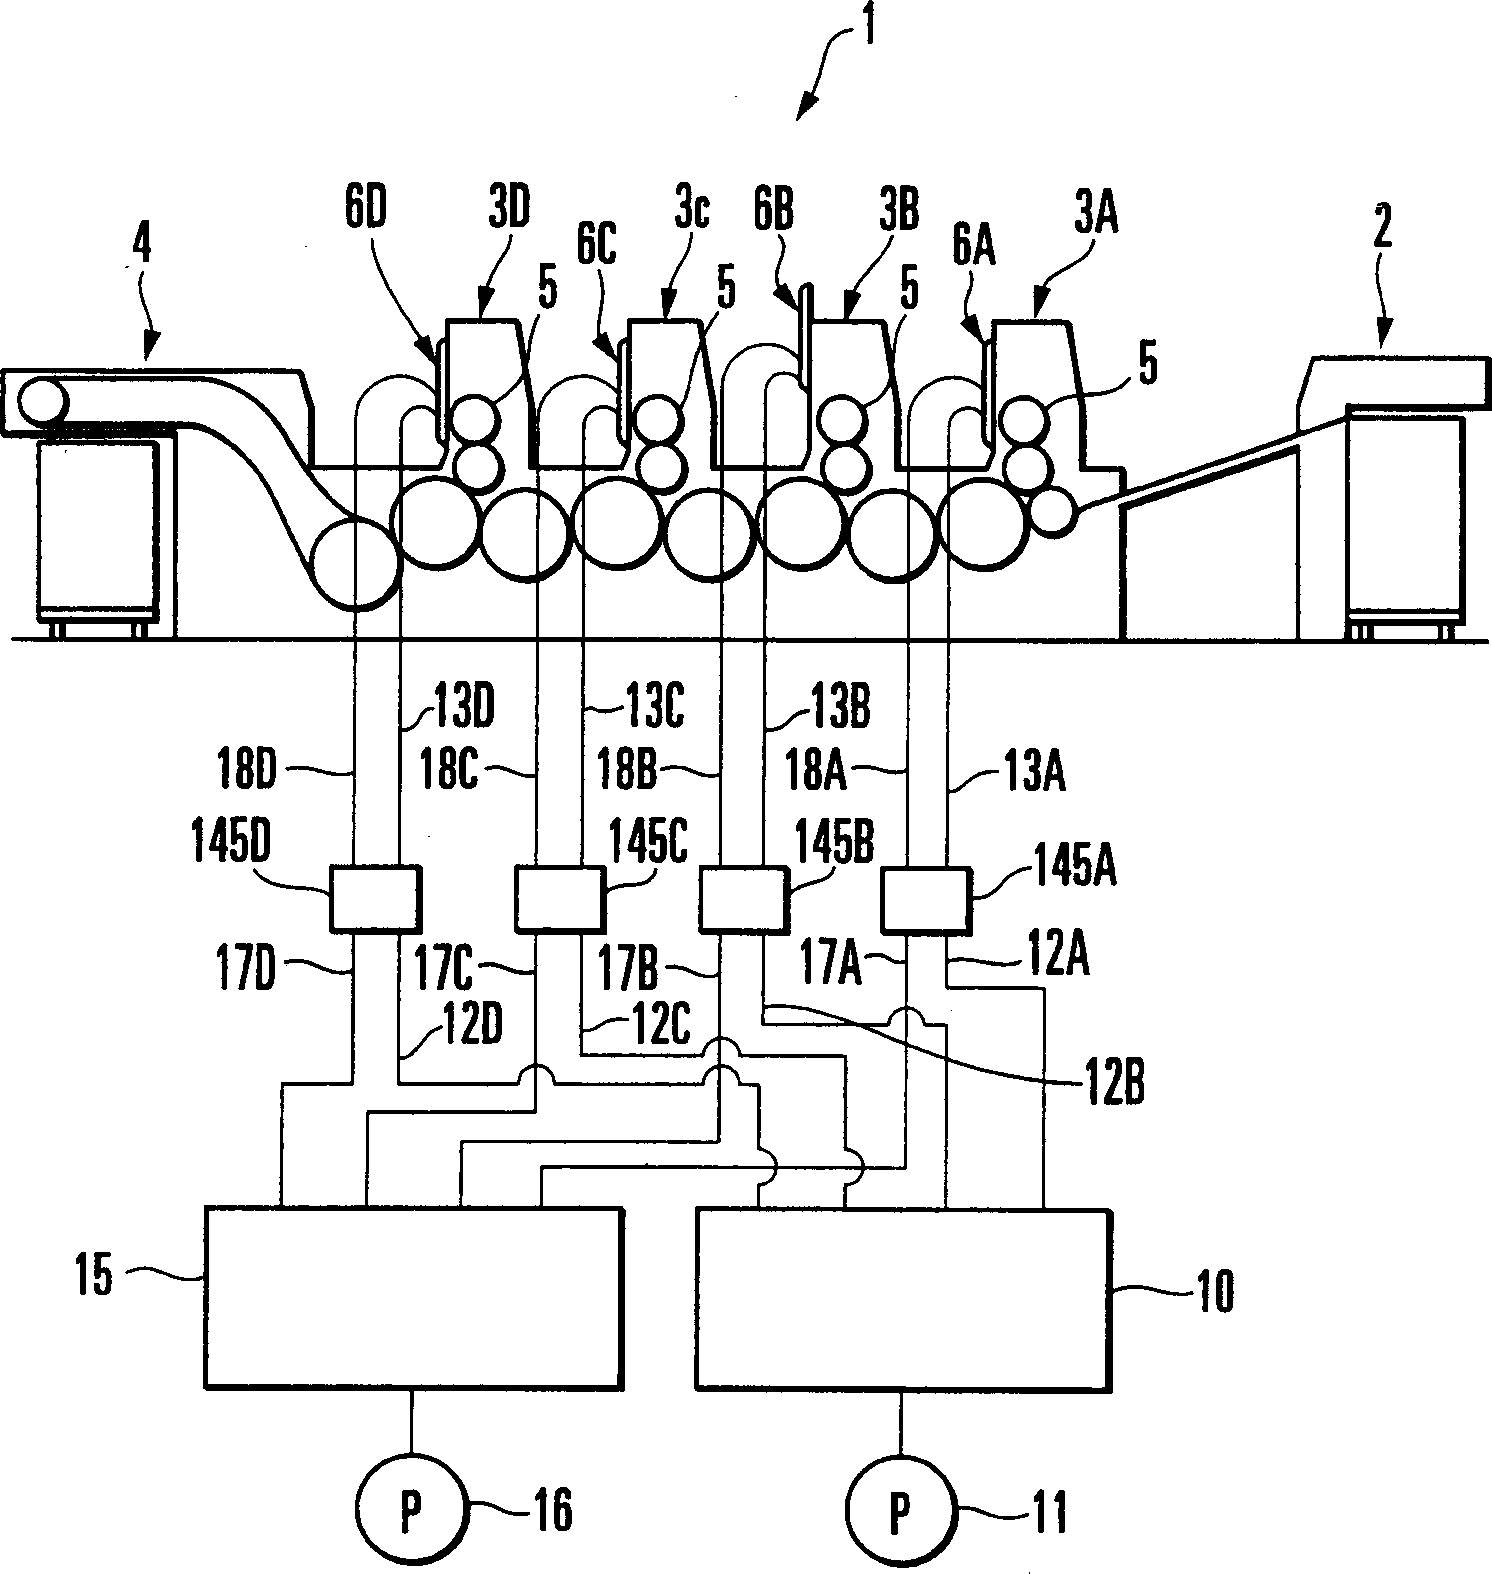 Plate holding apparatus